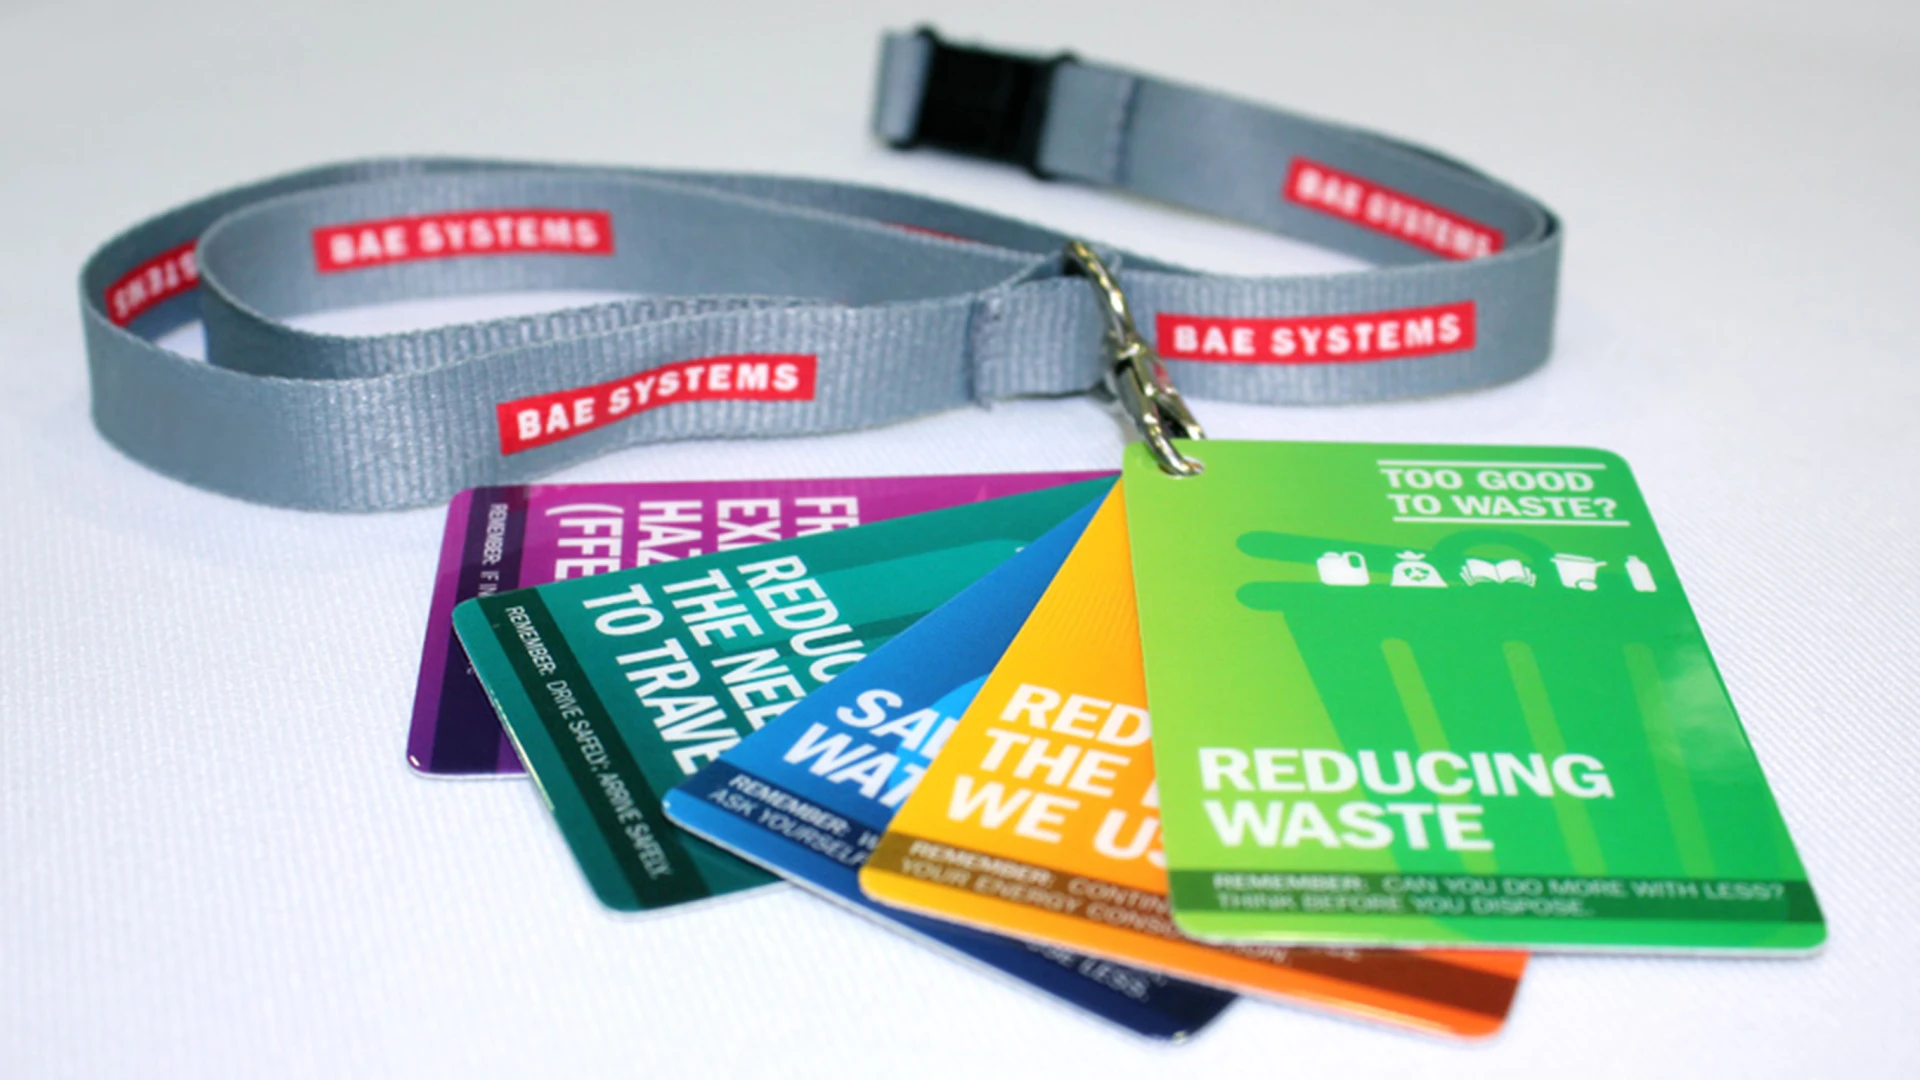 BAE Systems 'Too good to waste' Campaign, 